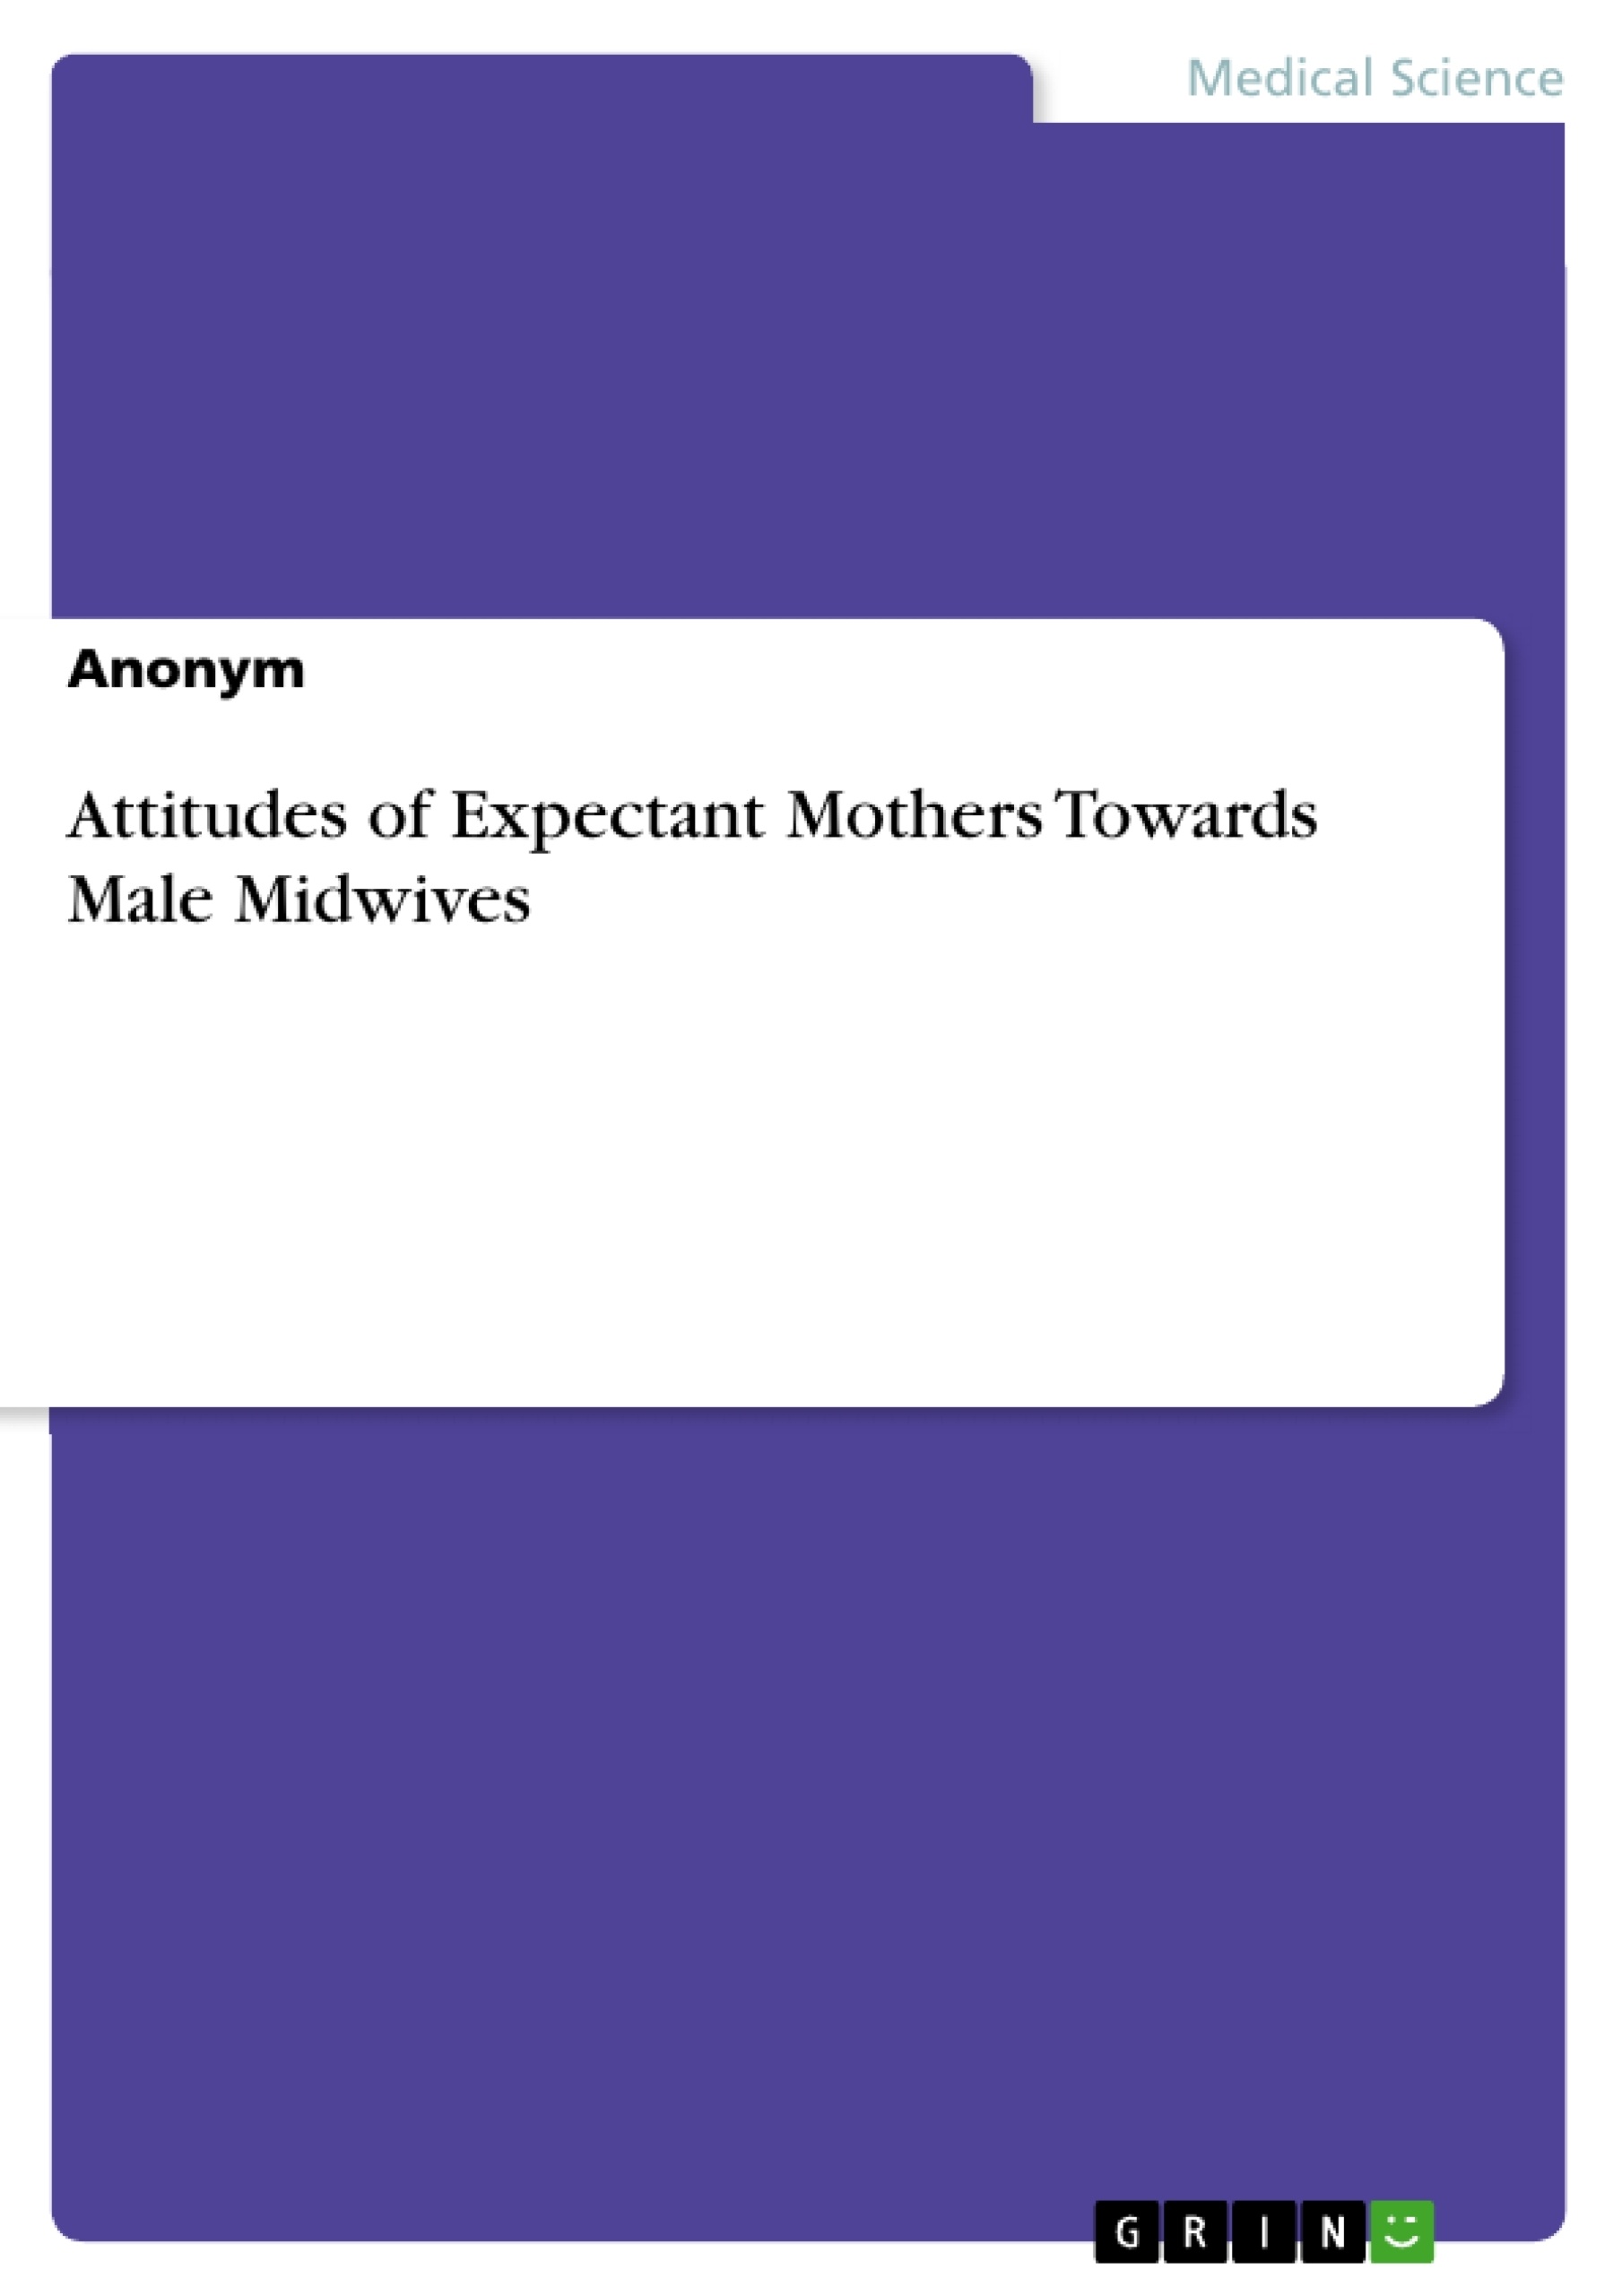 Titre: Attitudes of Expectant Mothers Towards Male Midwives